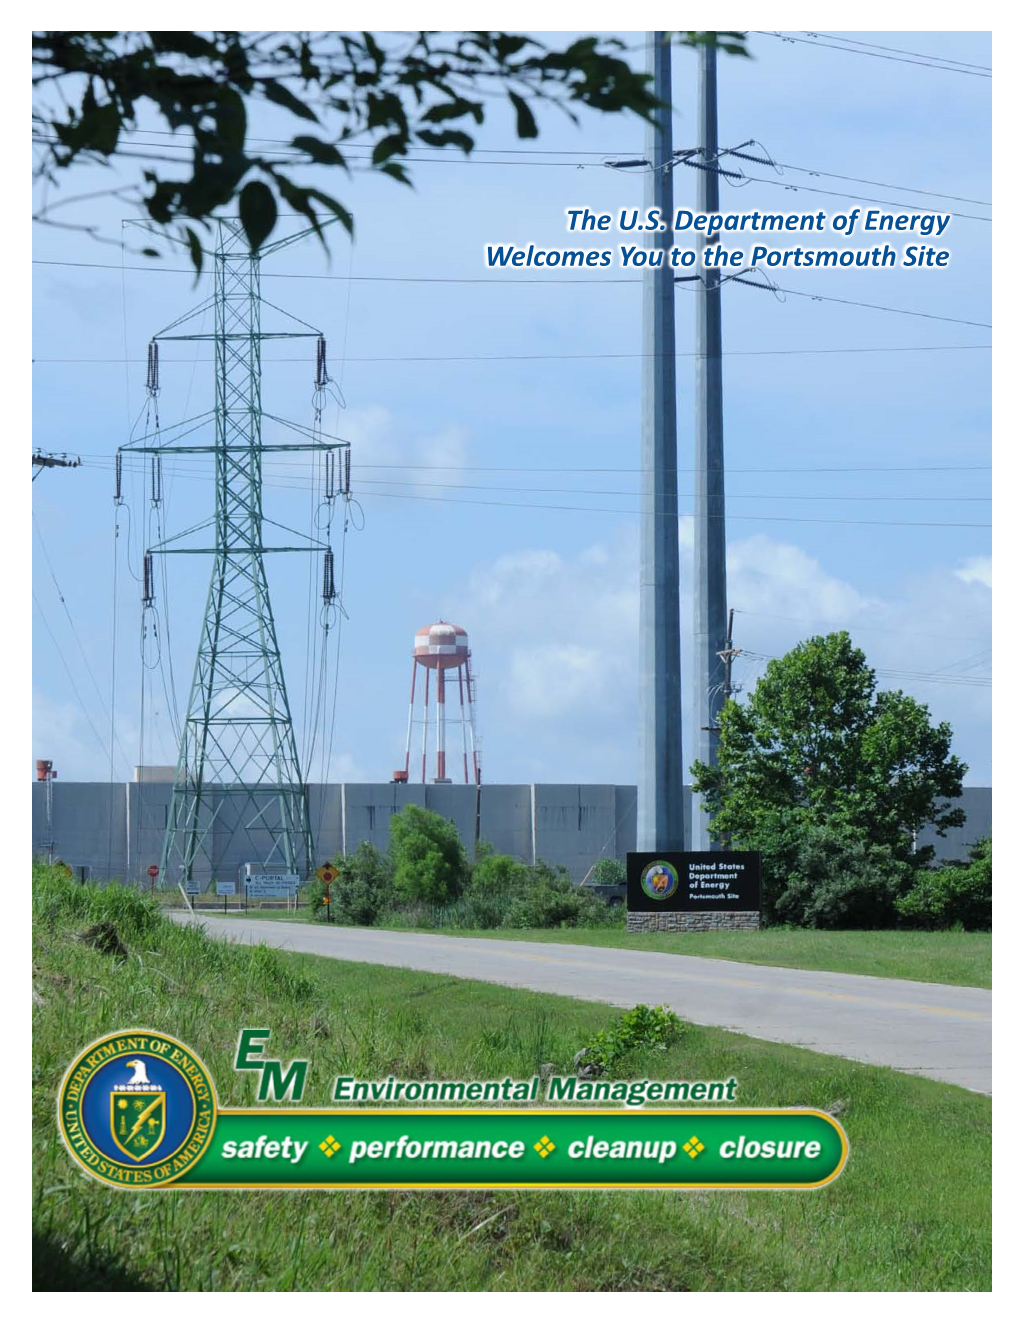 The U.S. Department of Energy Welcomes You to the Portsmouth Site